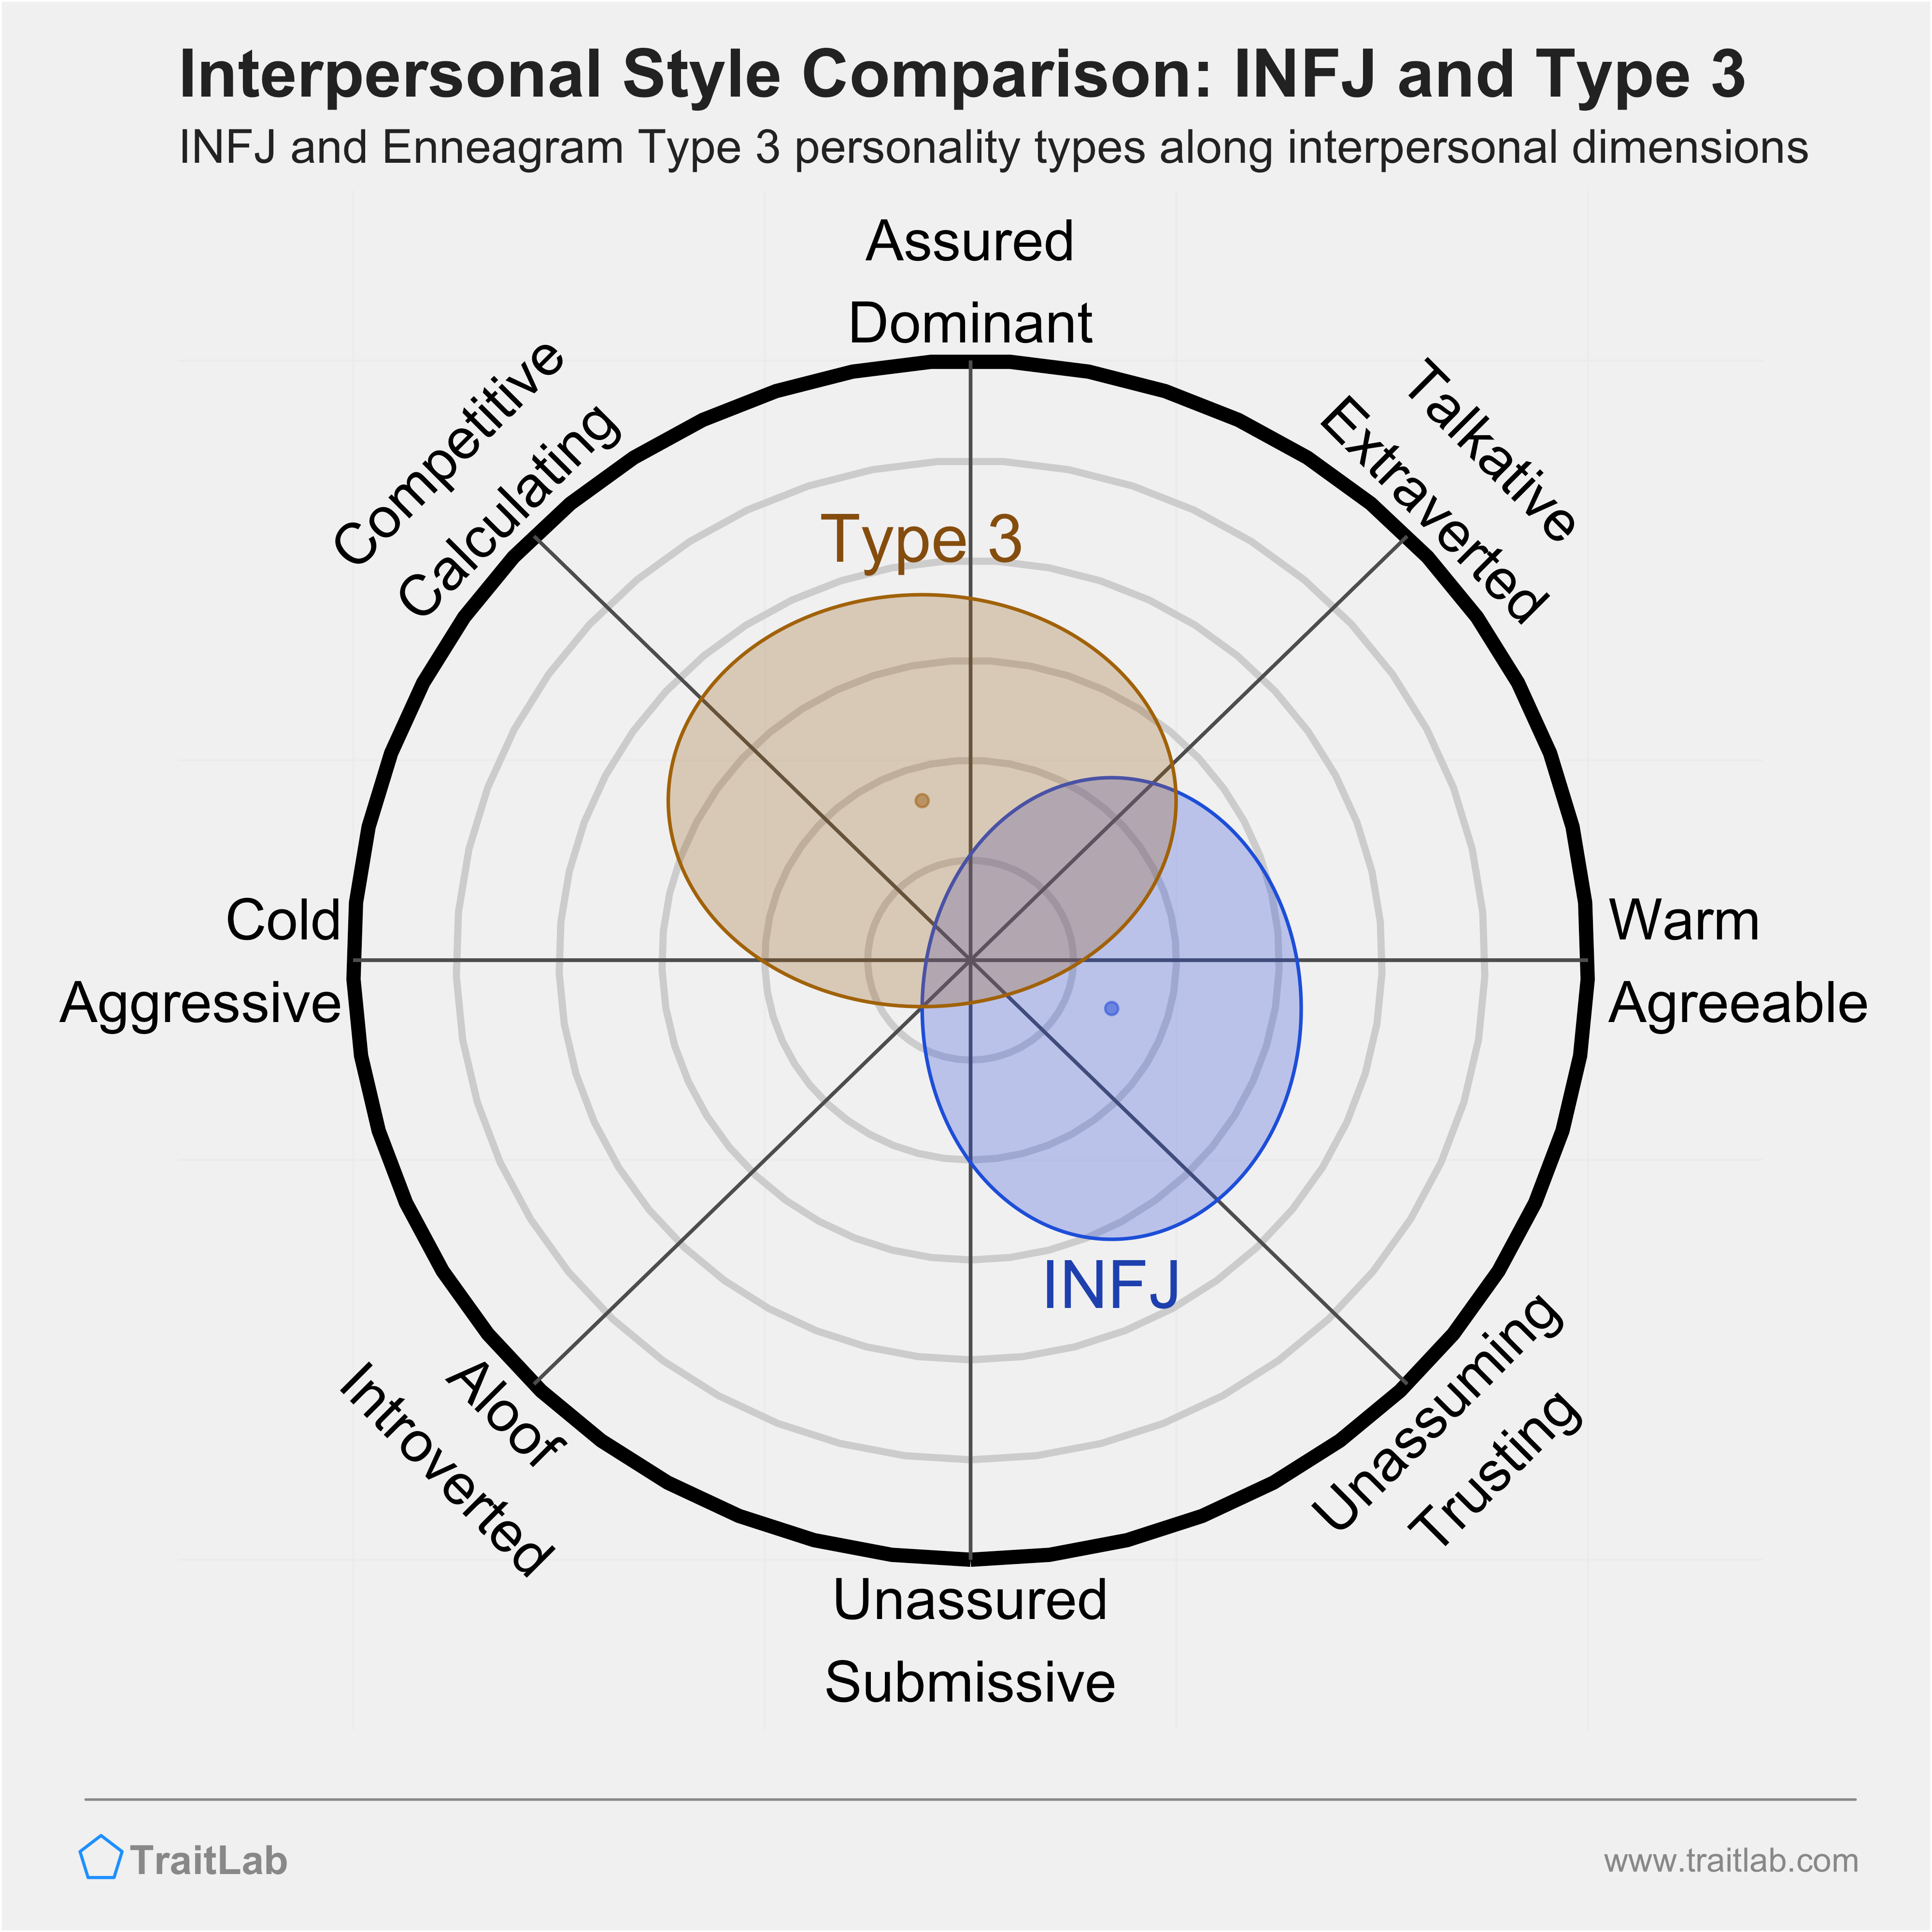 Enneagram INFJ and Type 3 comparison across interpersonal dimensions